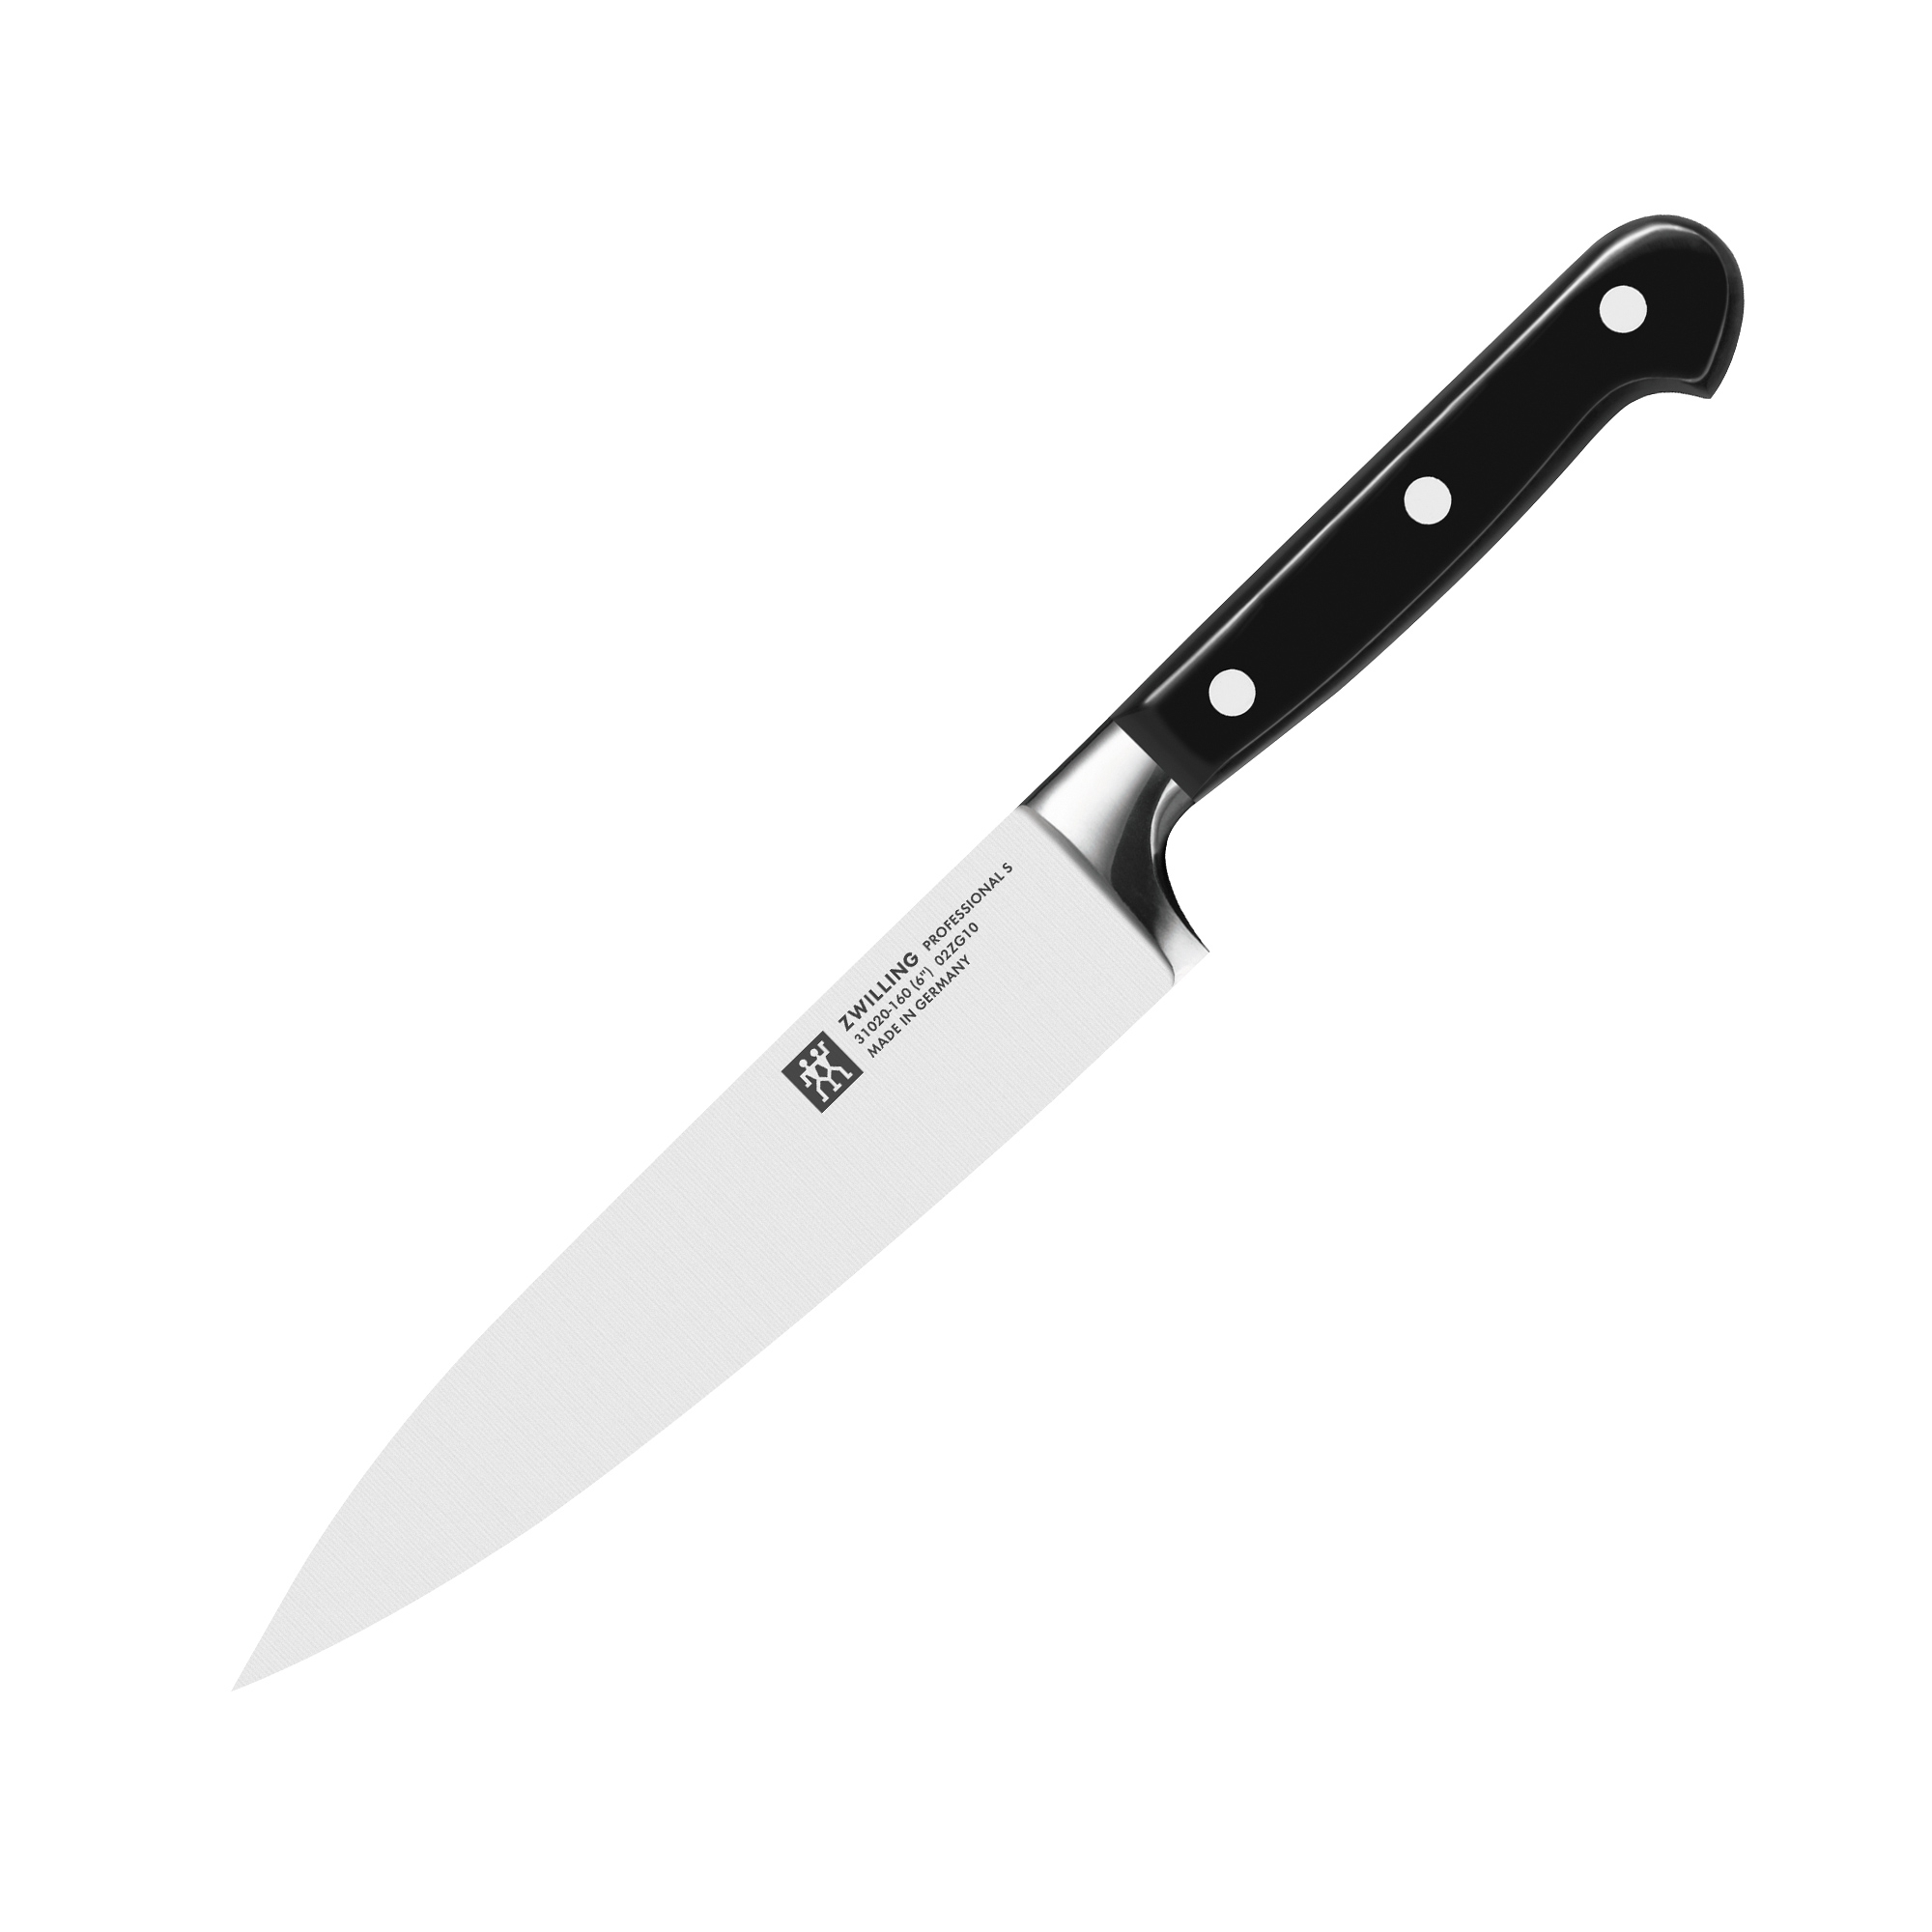 Zwilling - Professional S - Chef's knife  - 16 cm